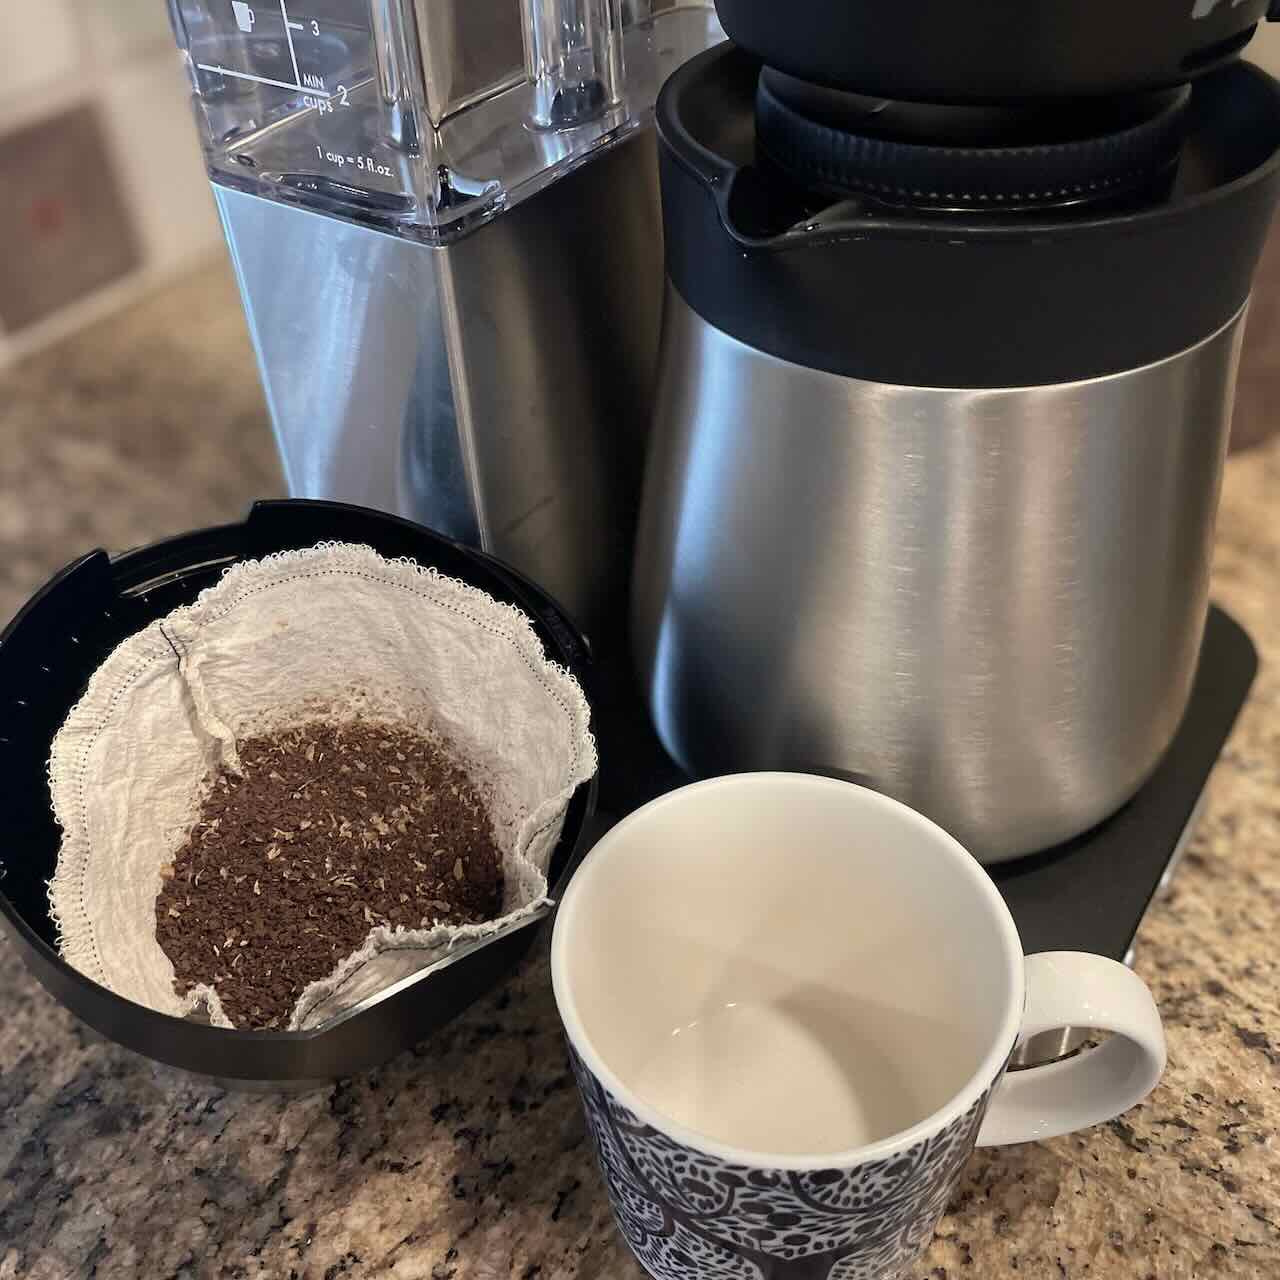 size 4 coffee filter filled with ground coffee inside basket next to the coffee maker and a porcelain coffee cup